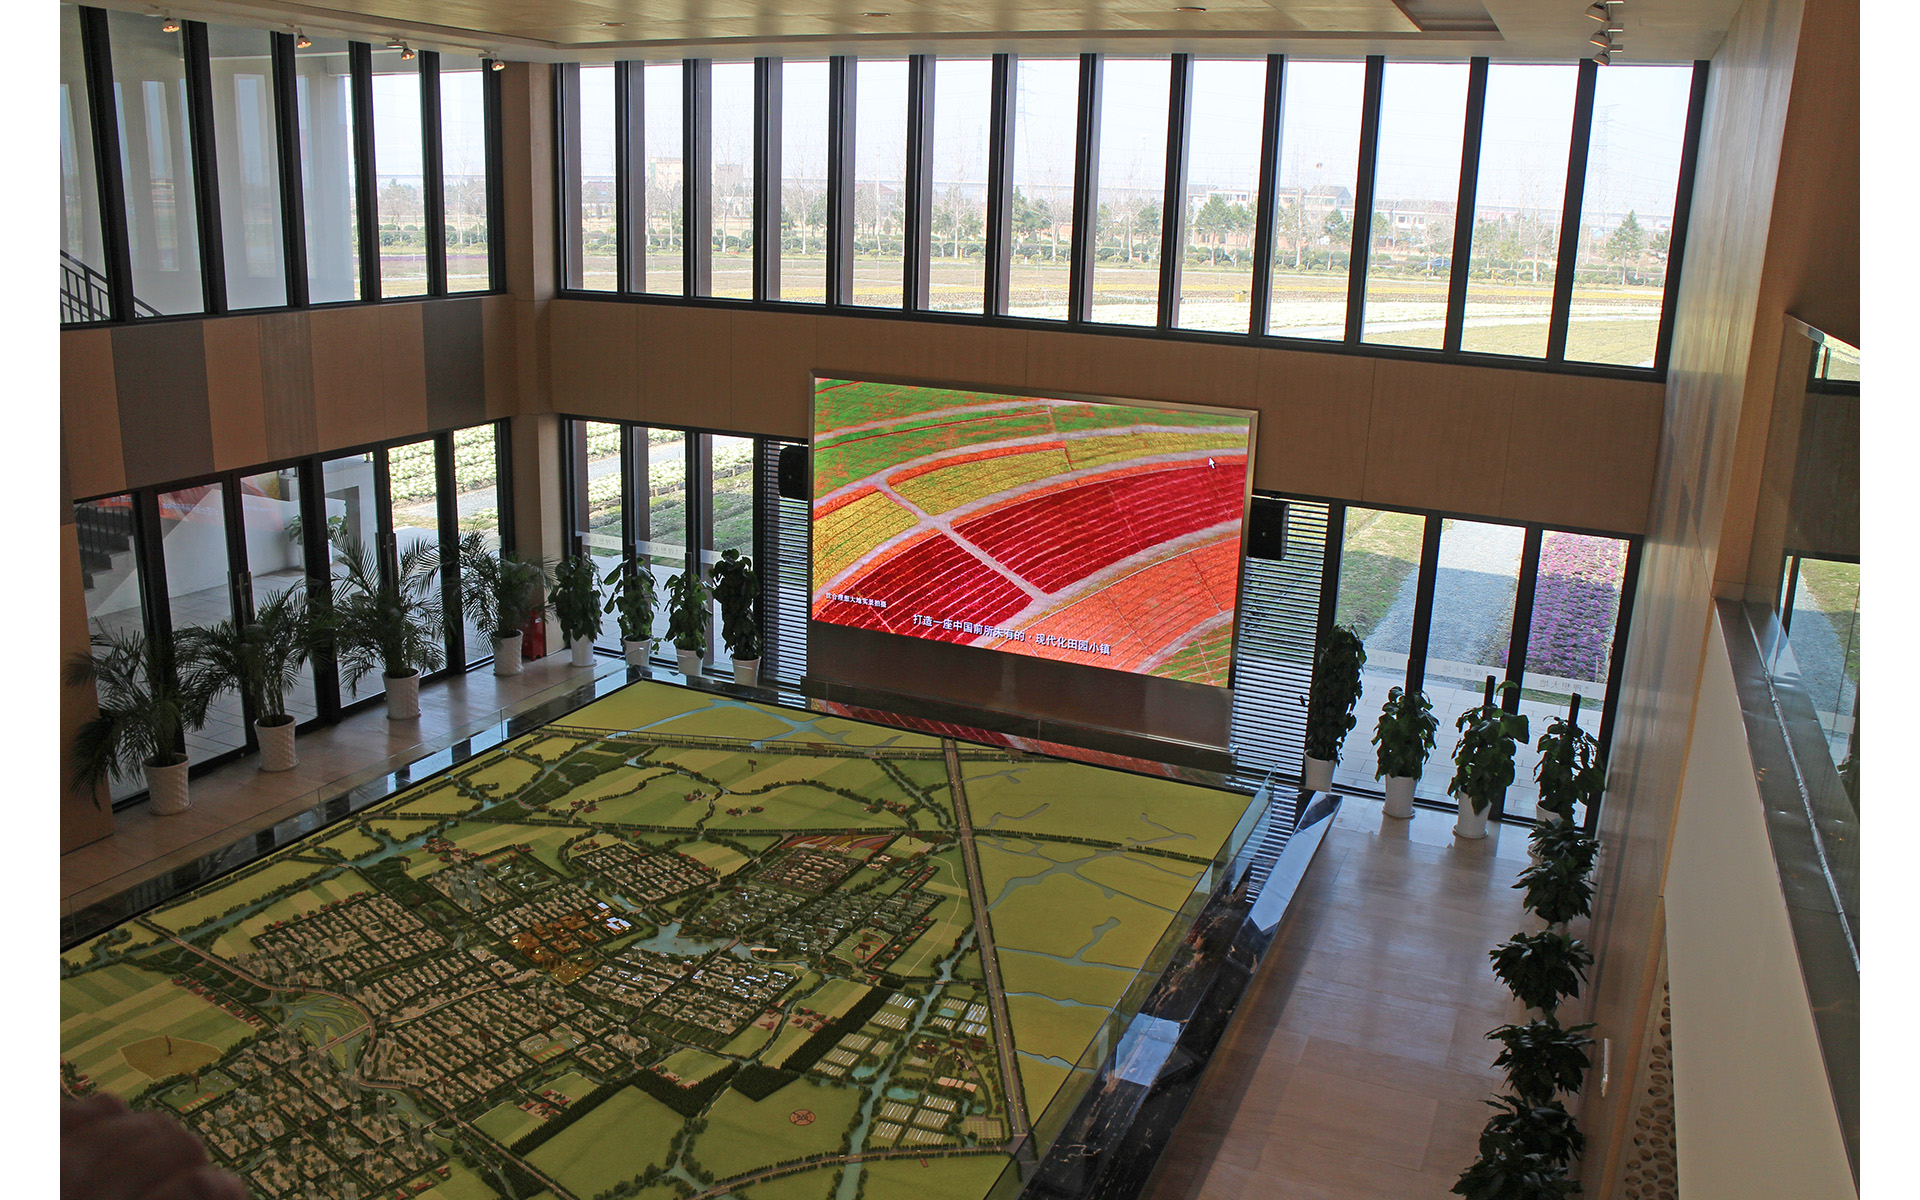 Jiaxing Shihe Sales office and reception center